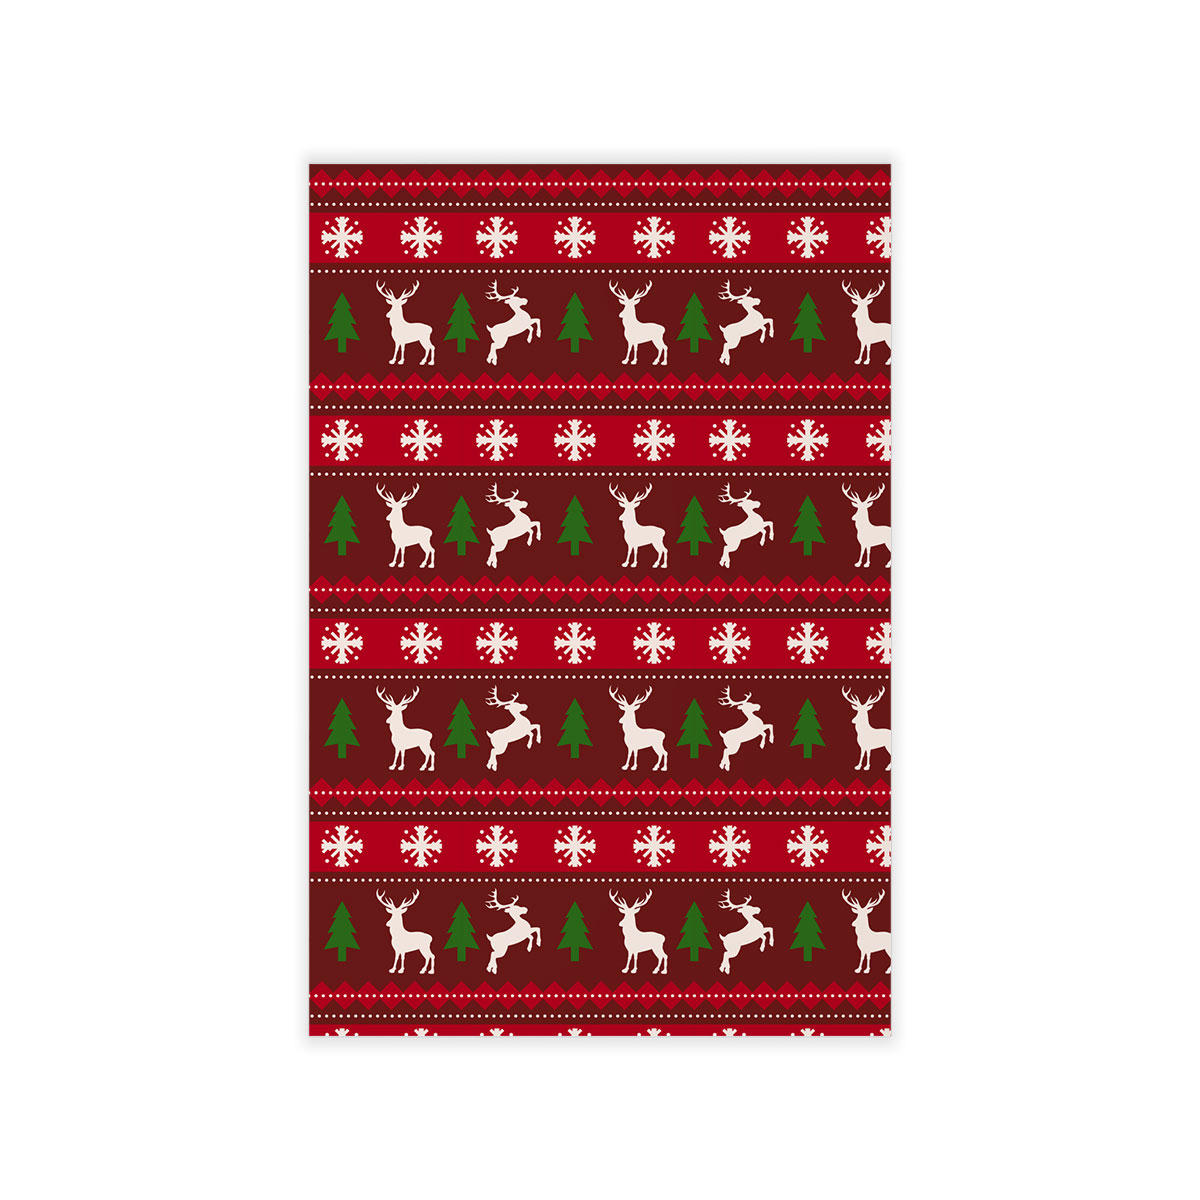 Red Green And White Christmas Tree, Reindeer With Snowflake Wall Decals